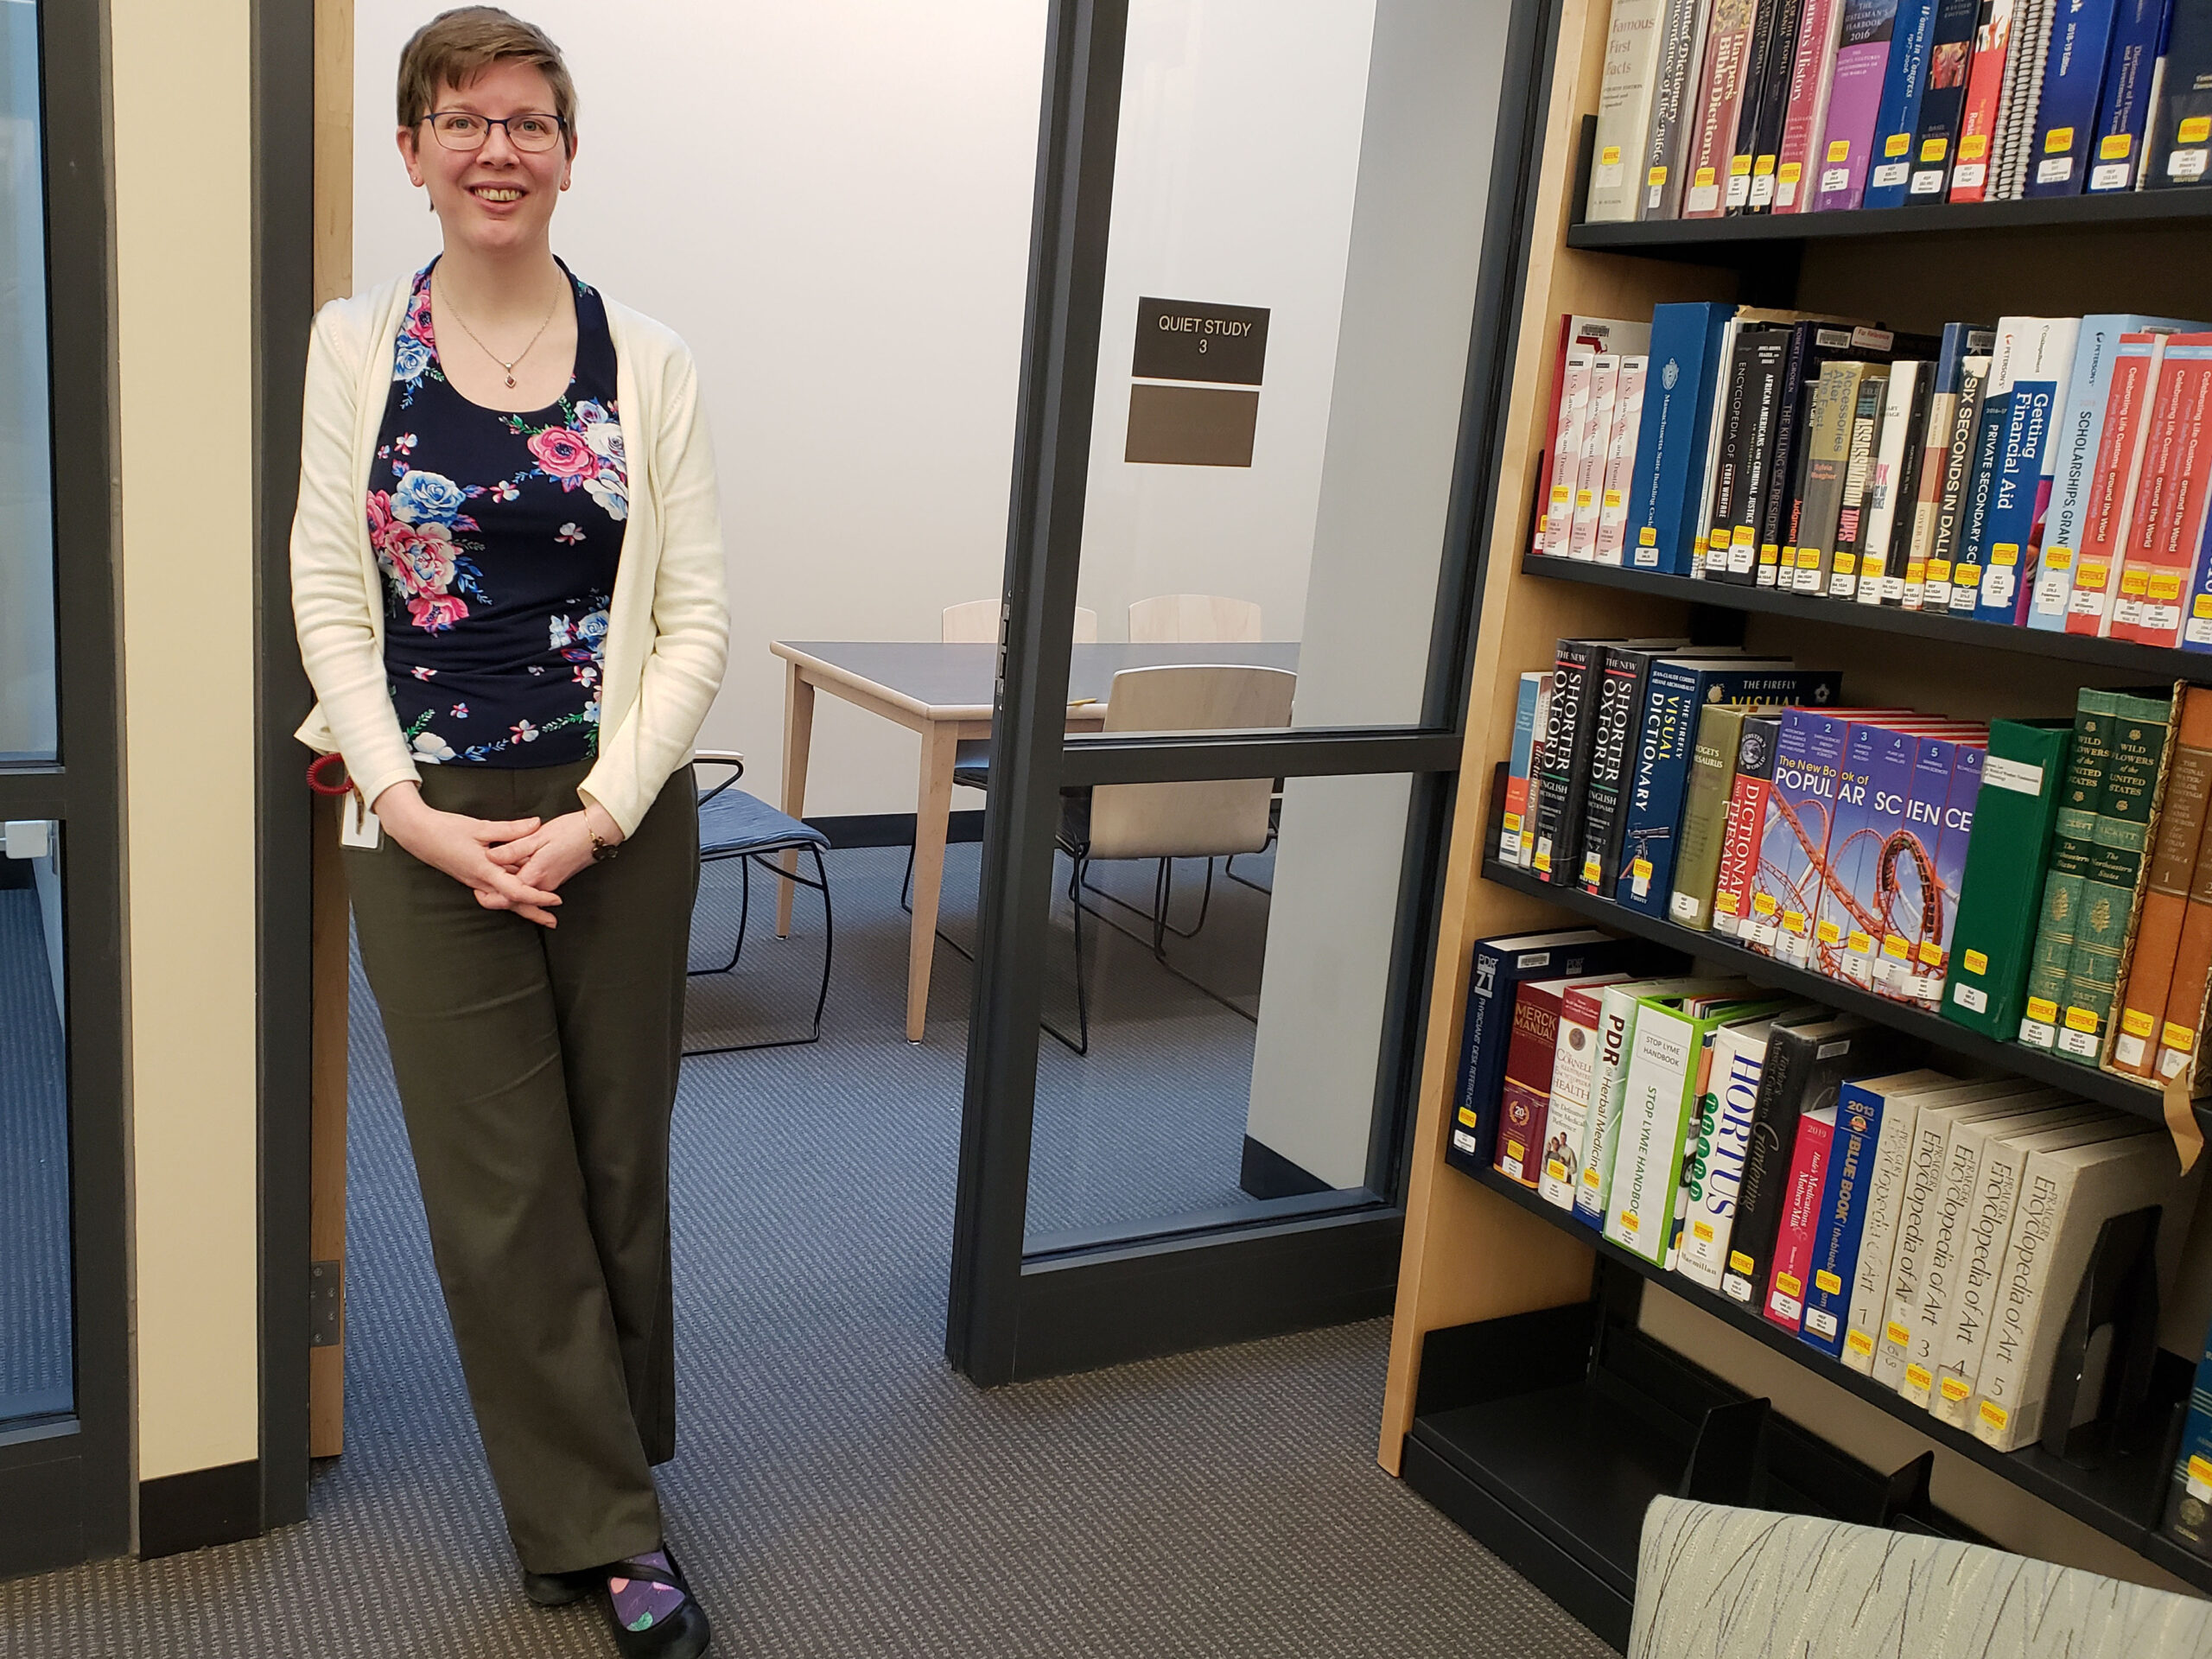 Backman to leave job as library director next month